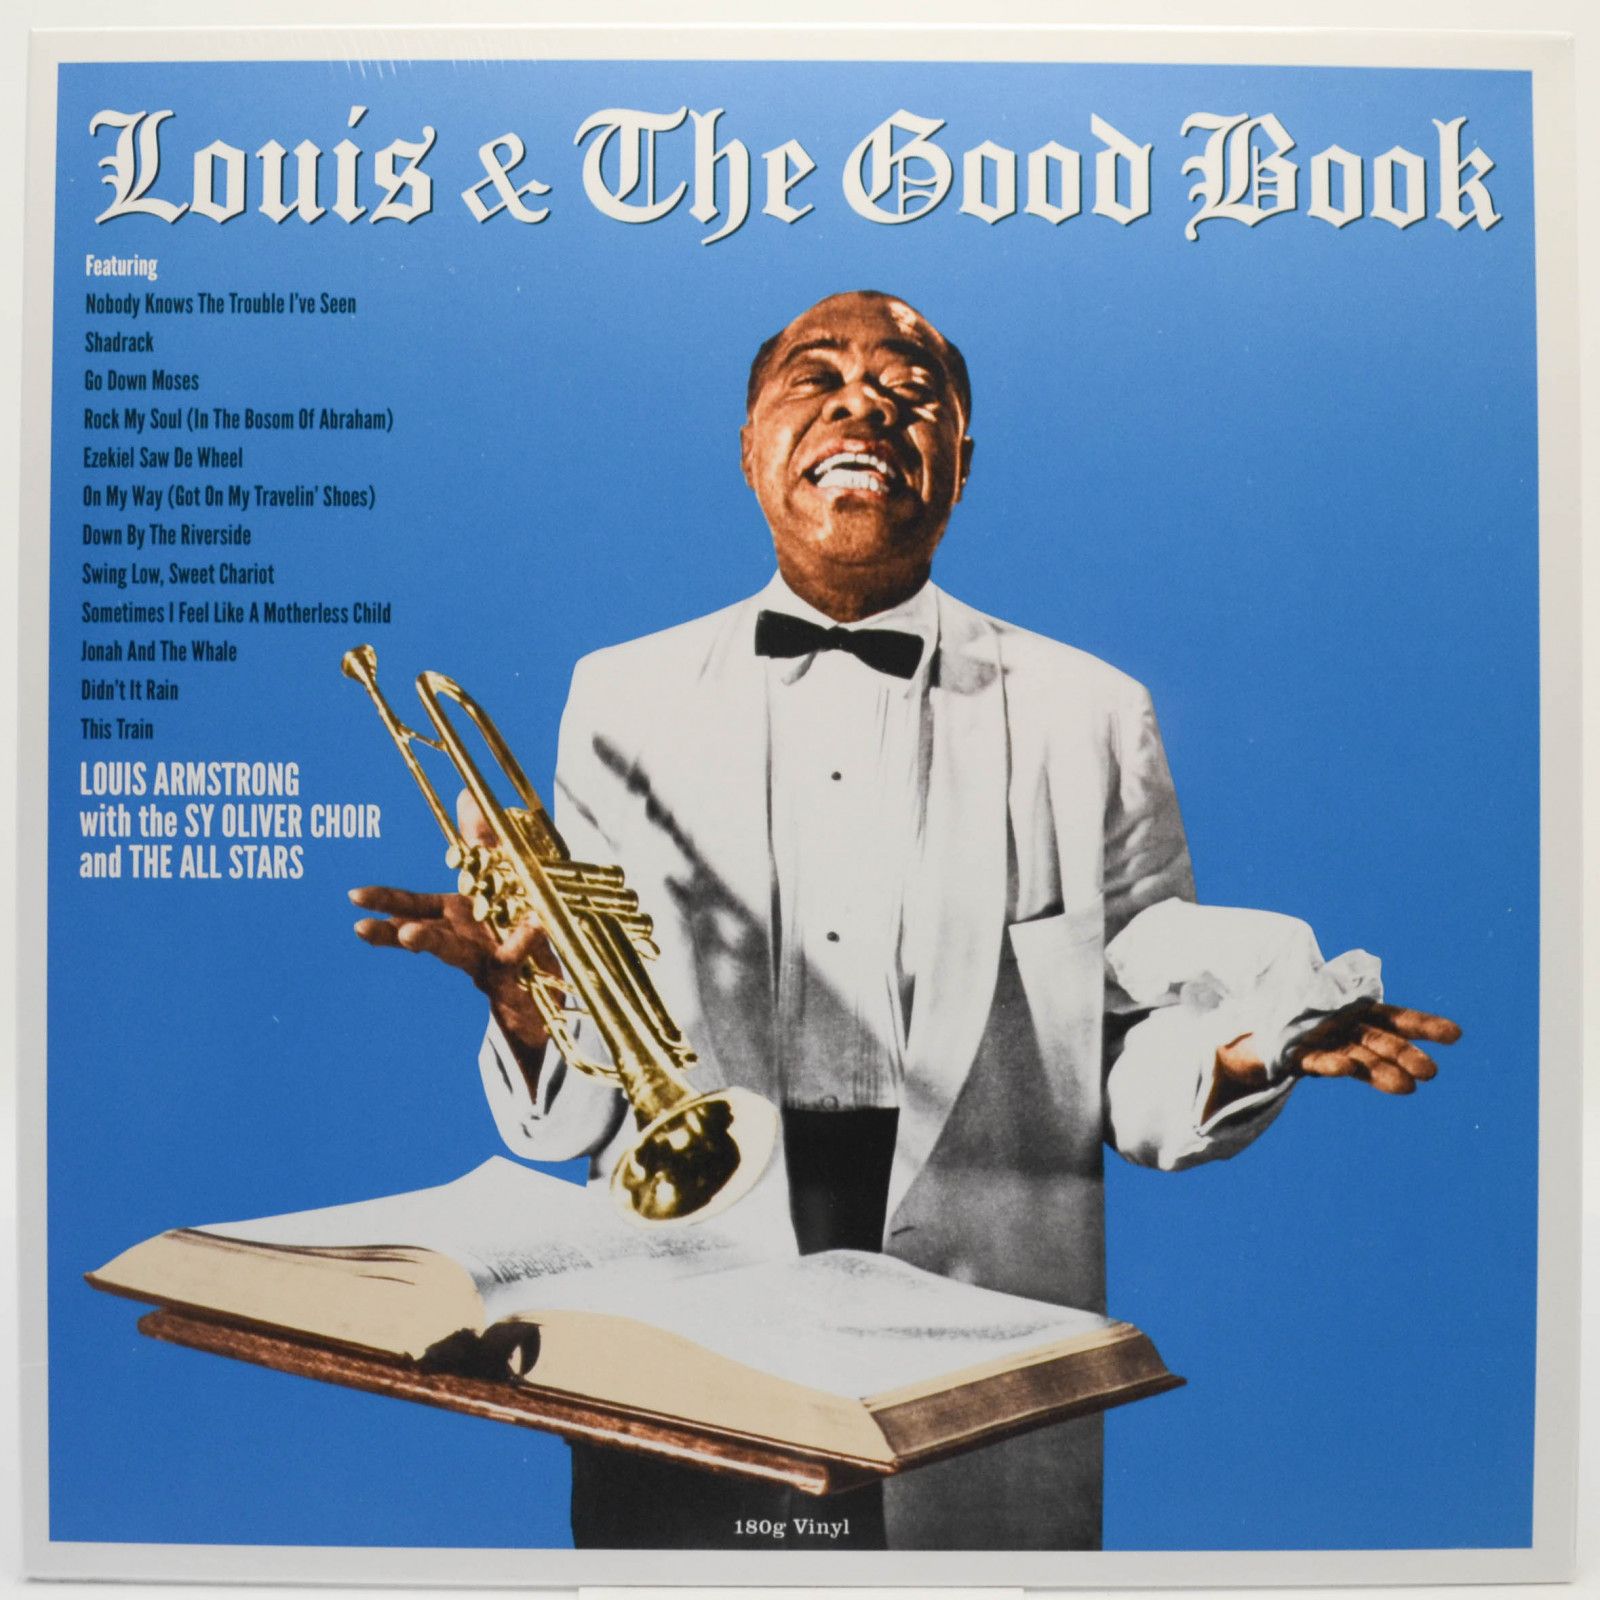 Louis Armstrong And His All-Stars With The Sy Oliver Choir — Louis & The Good Book, 1958